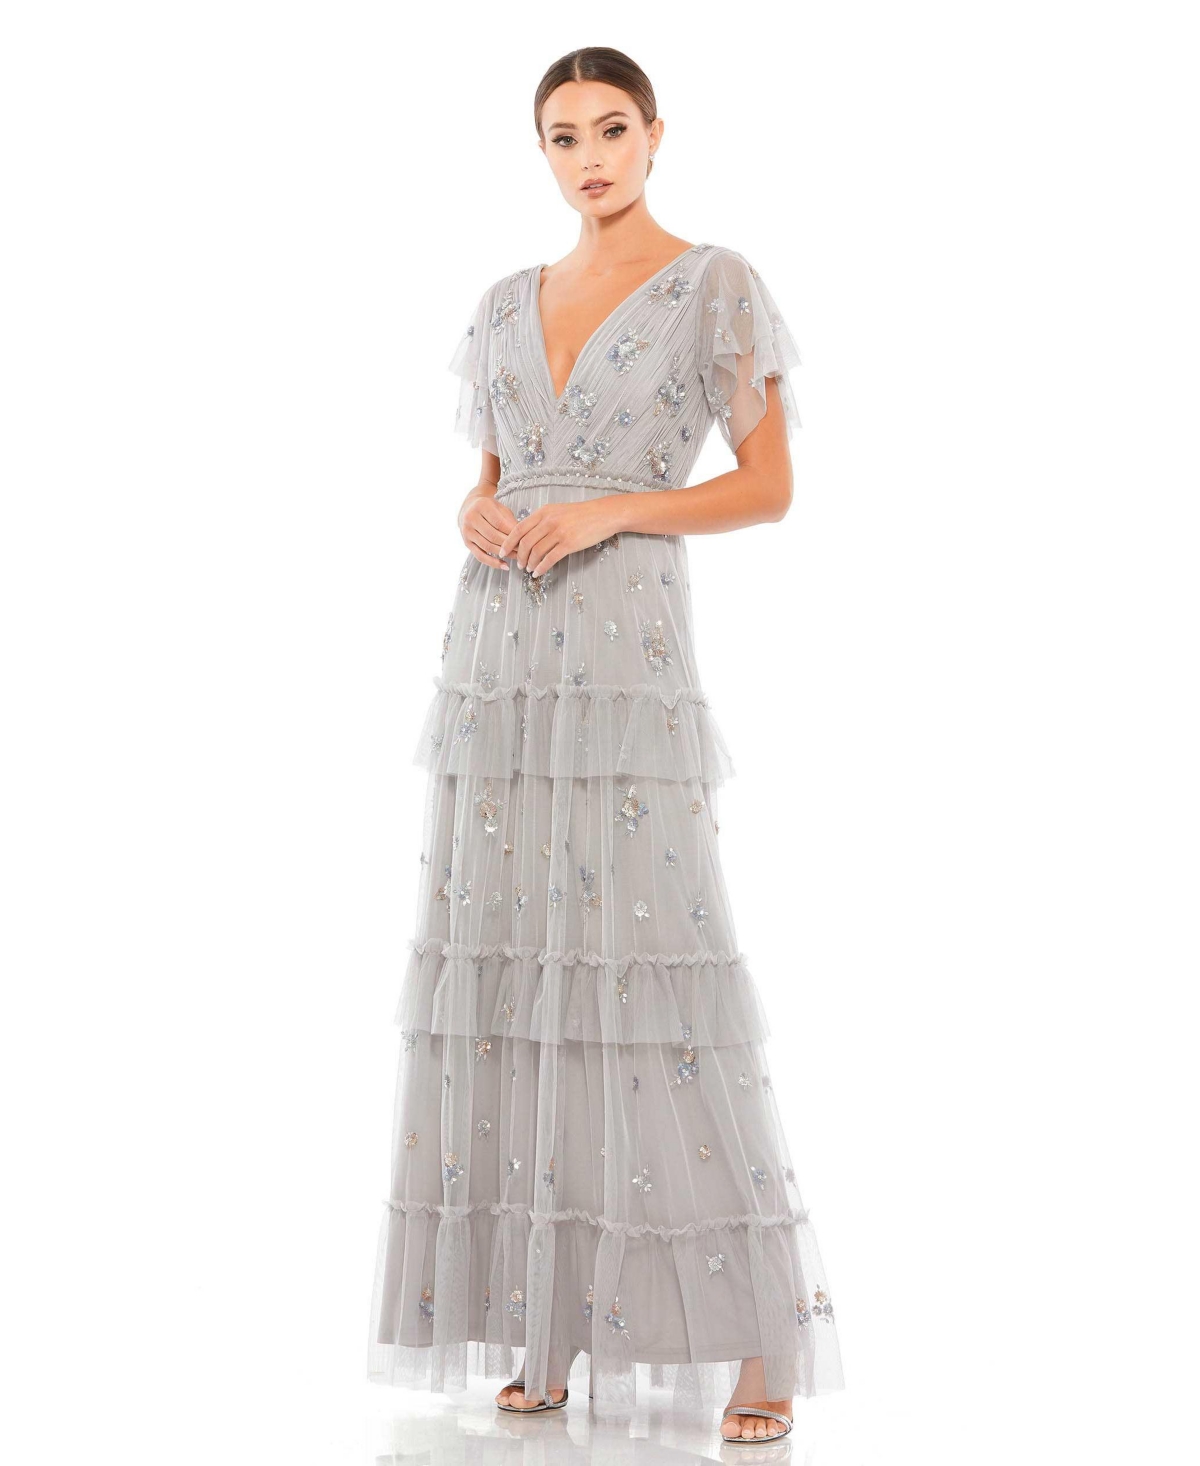 Downton Abbey Inspired Dresses Womens Ruffle Tiered Embellished Flutter Sleeve Gown - Platinum $598.00 AT vintagedancer.com